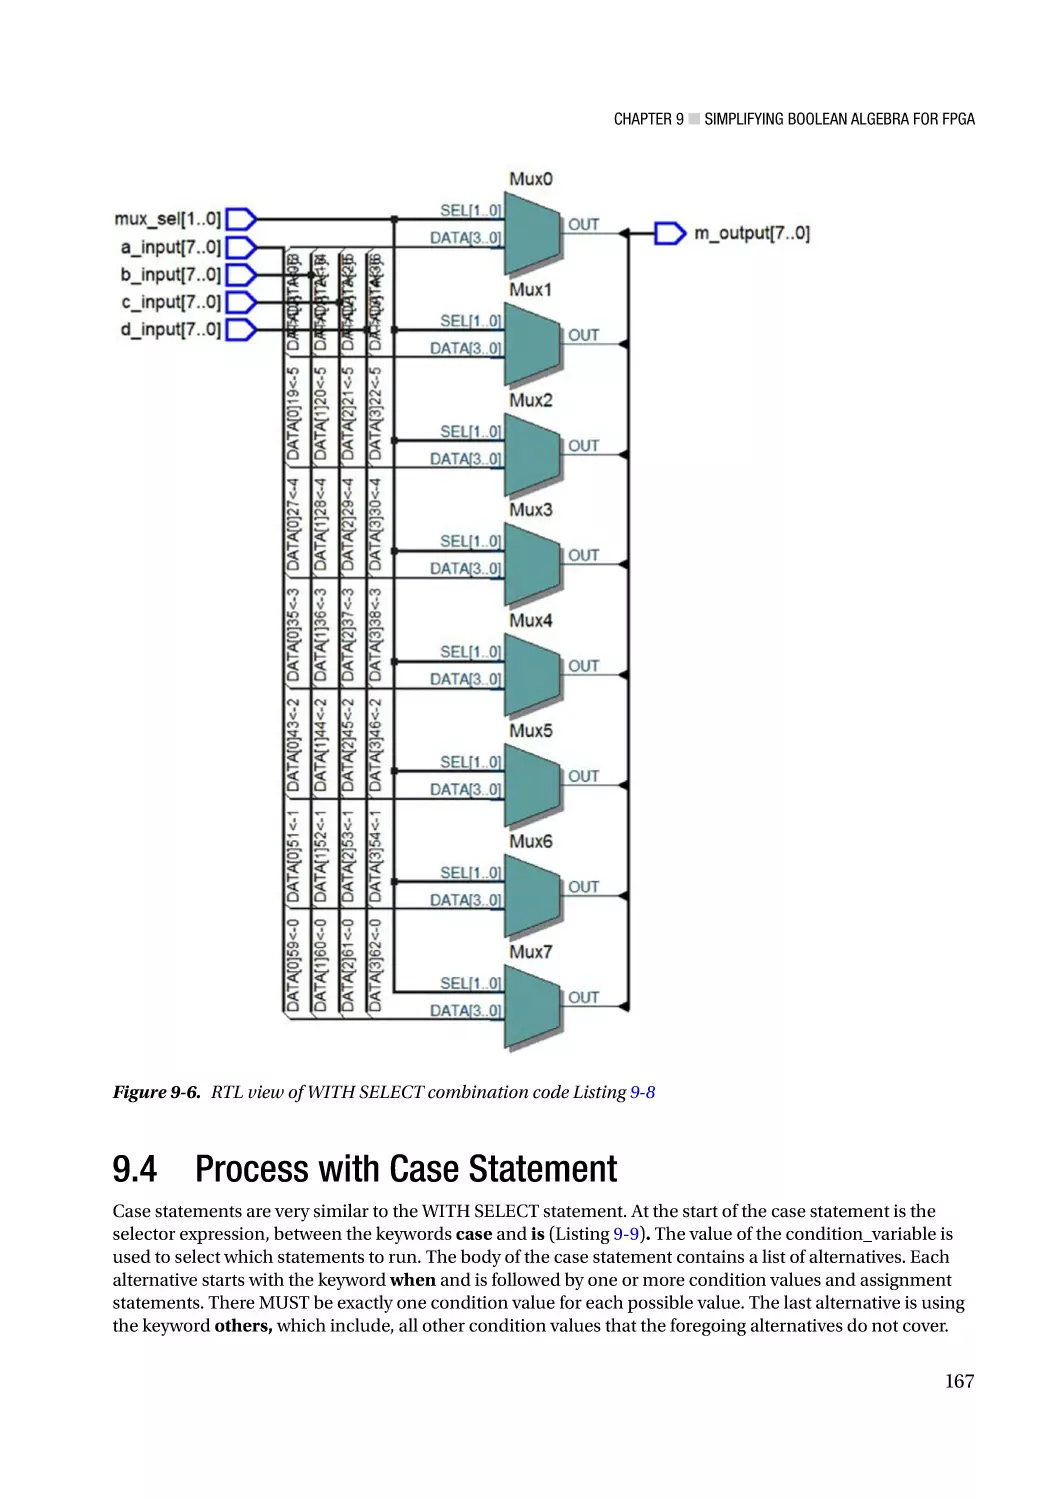 9.4 Process with Case Statement